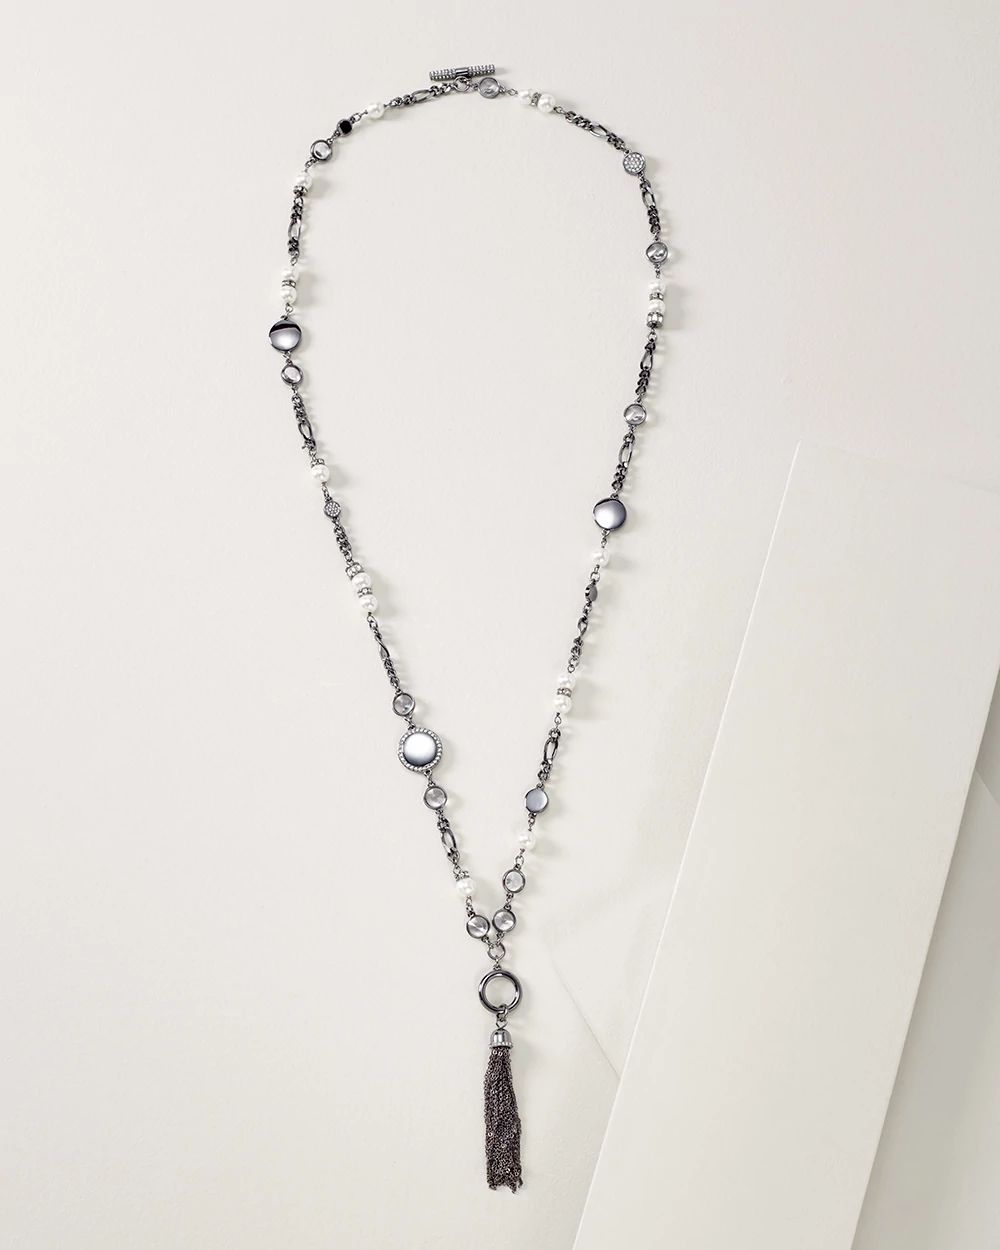 Hematite & Pearl Convertible Tassel Necklace click to view larger image.